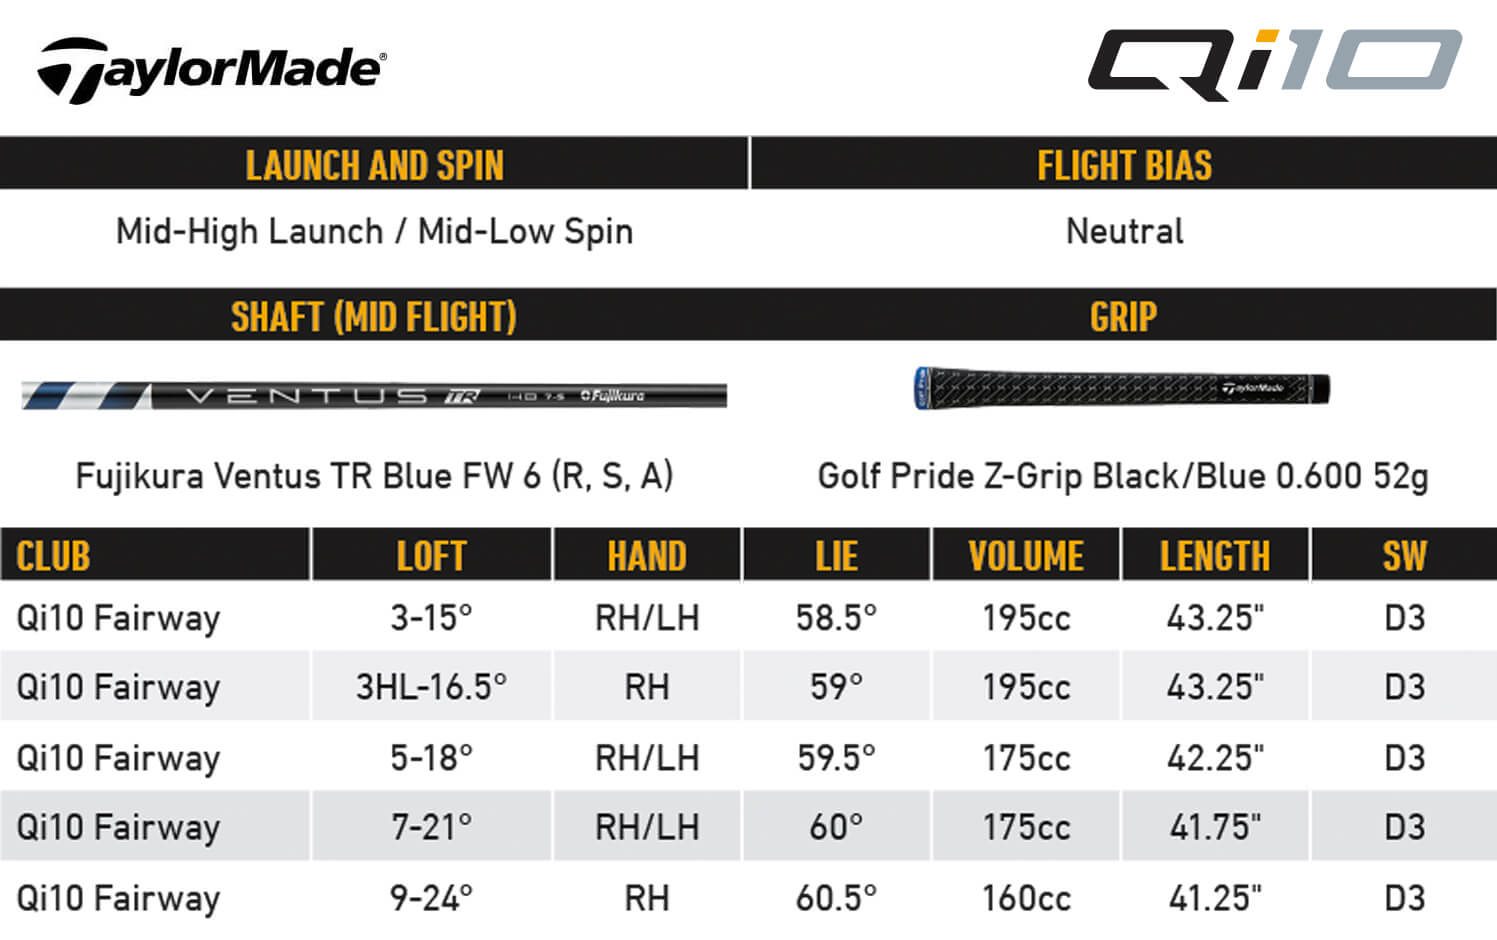 Specification for TaylorMade Qi10 Fairway Woods